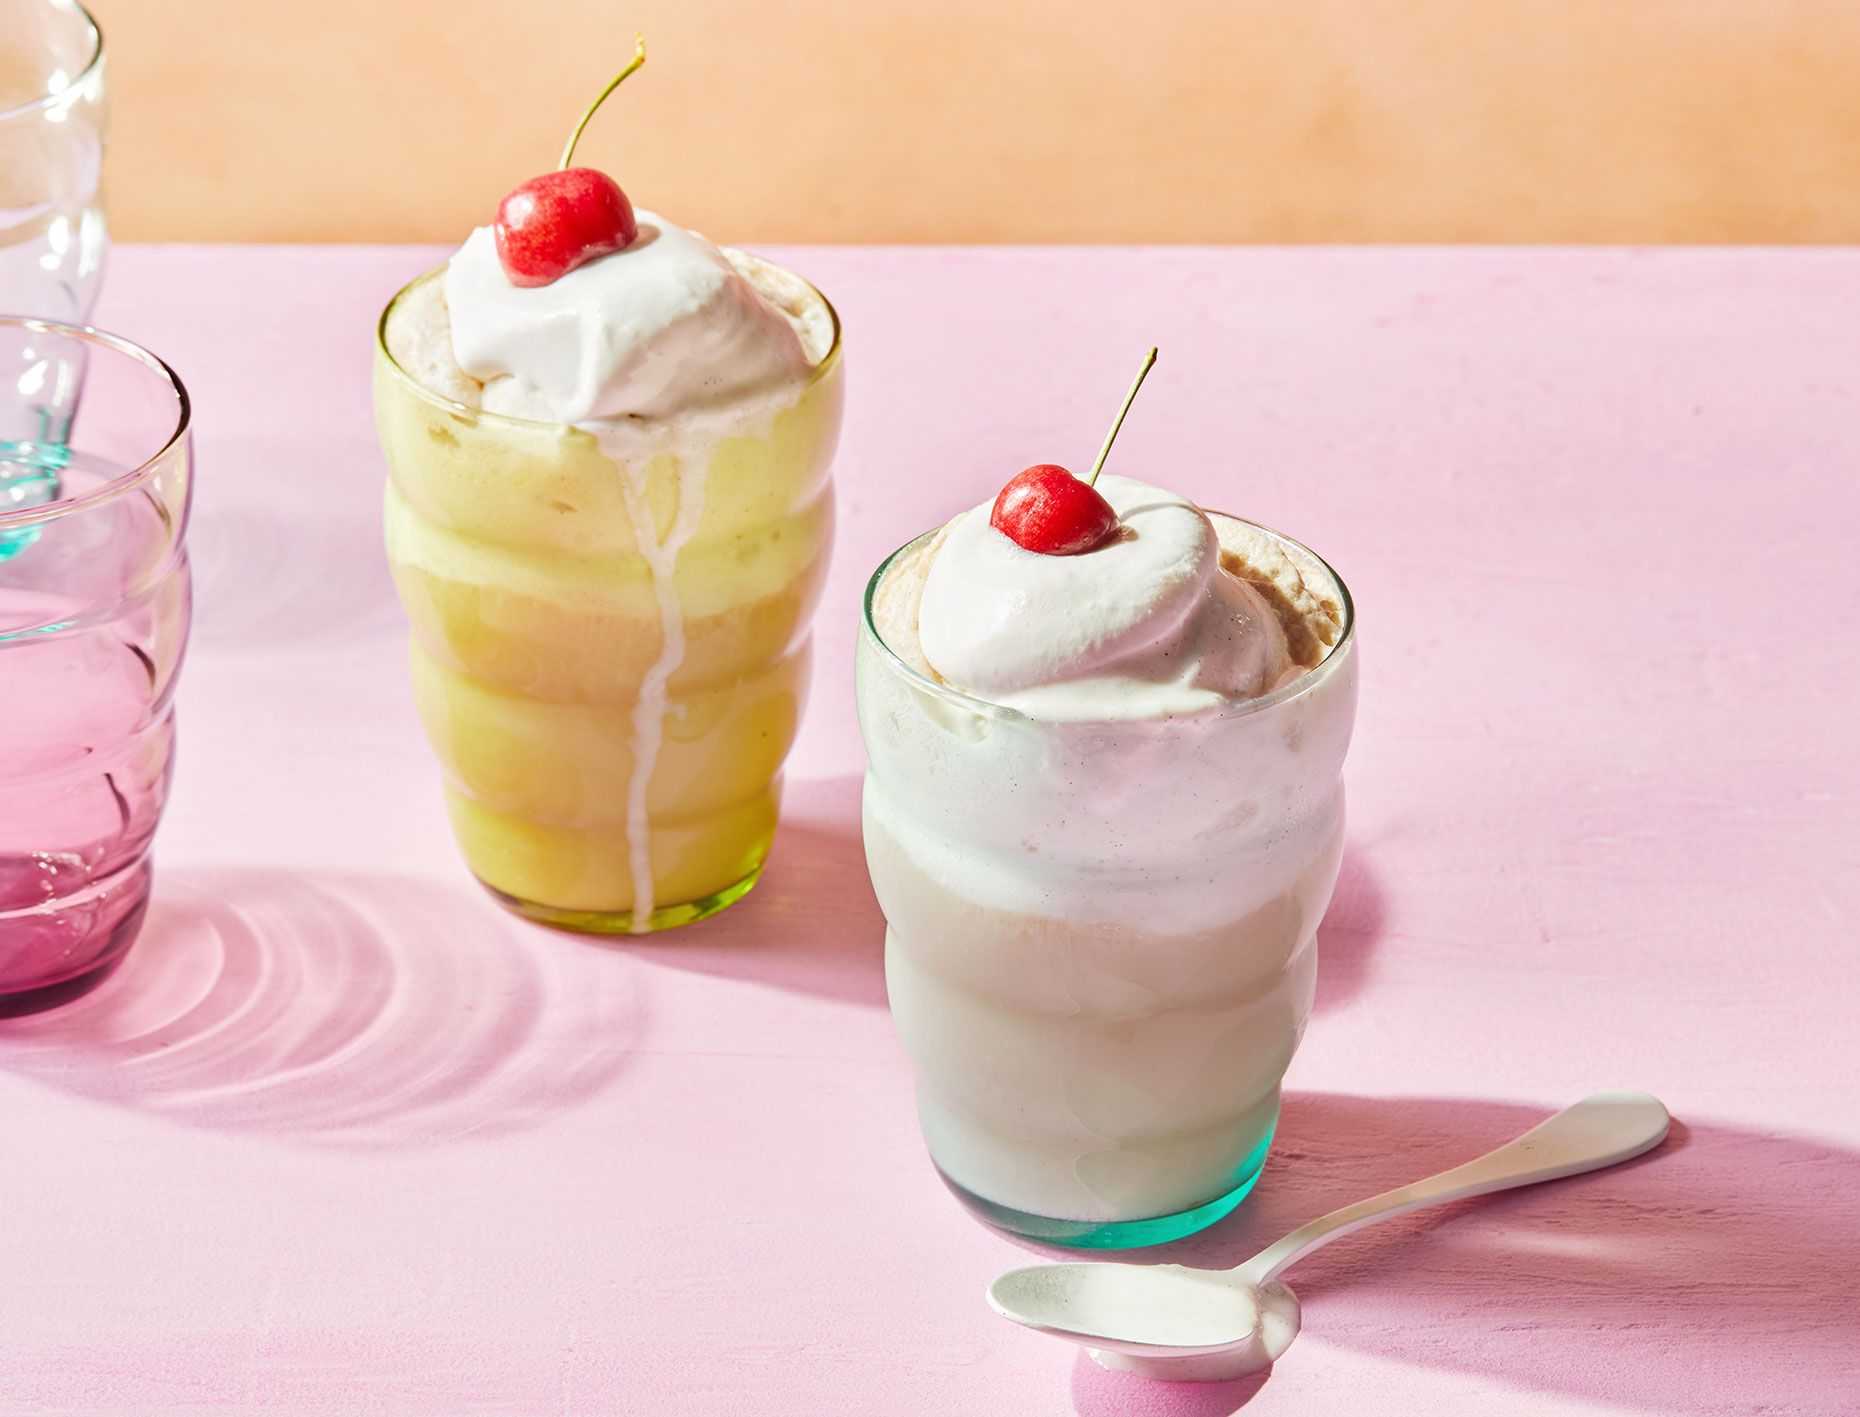 Kristin Teig Photography | Root beer floats for Goop